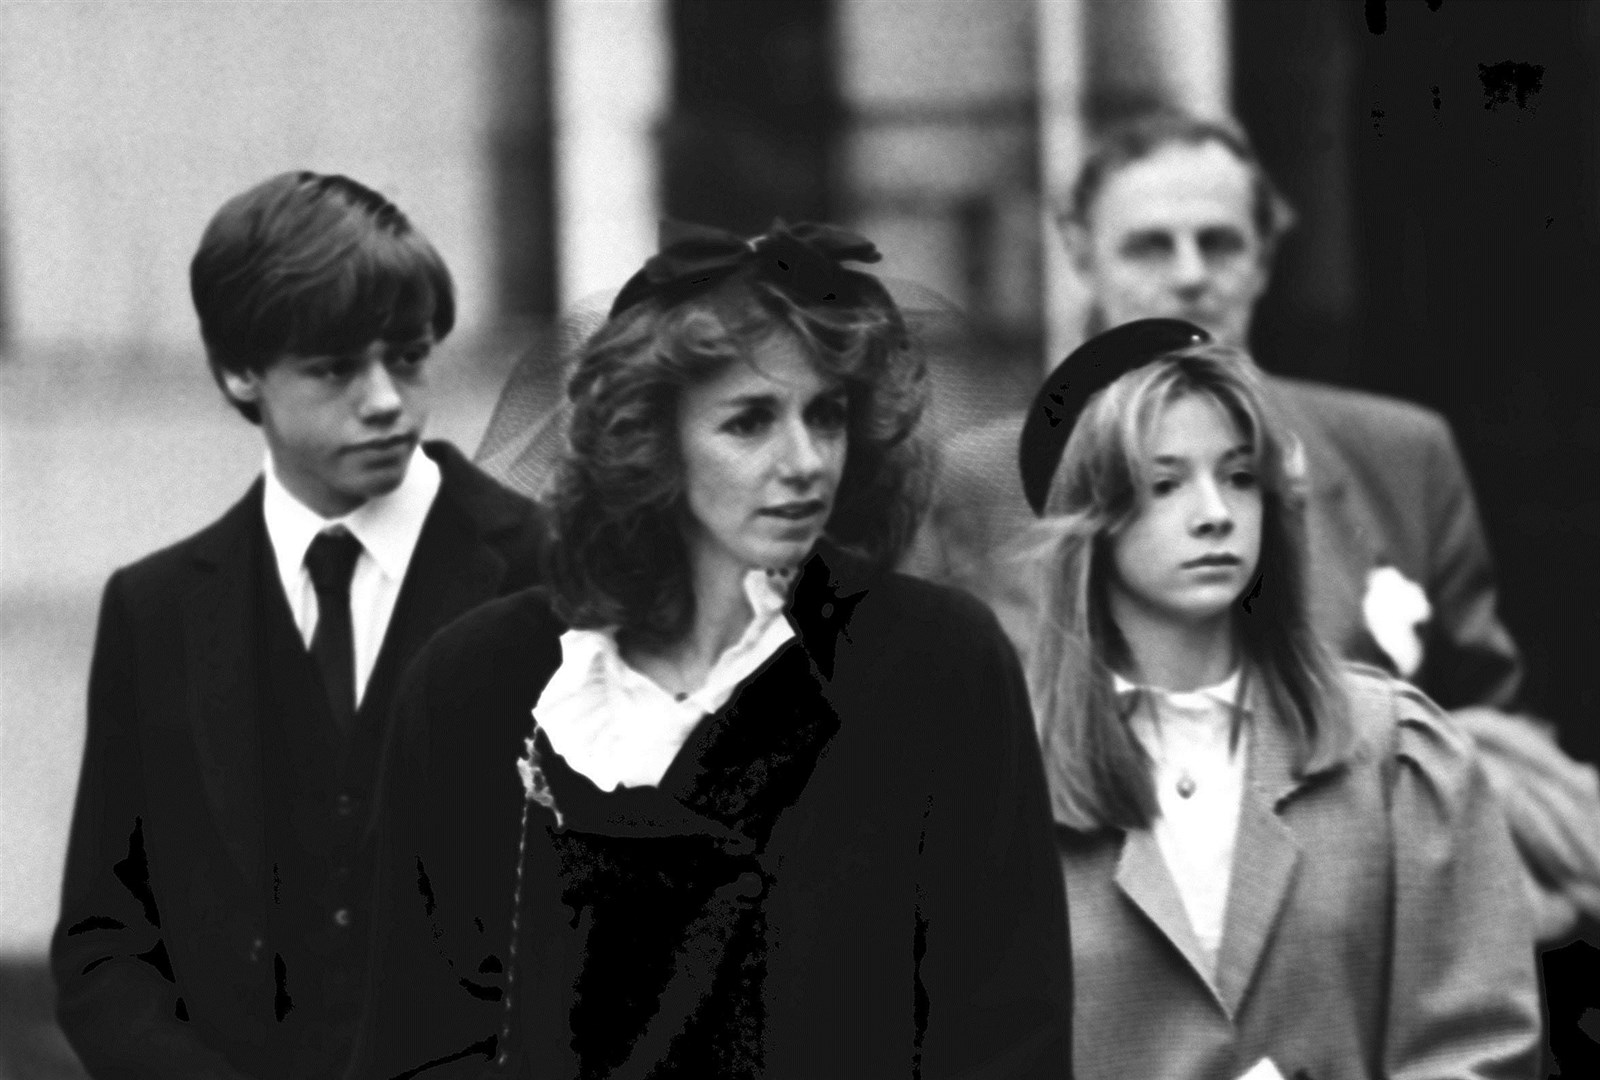 The widow of Sir Anthony Berry leaves St Margaret’s Church, Westminster, with her children after the memorial service for the Tory MP who was killed in the Brighton bomb blast (Archive/PA)